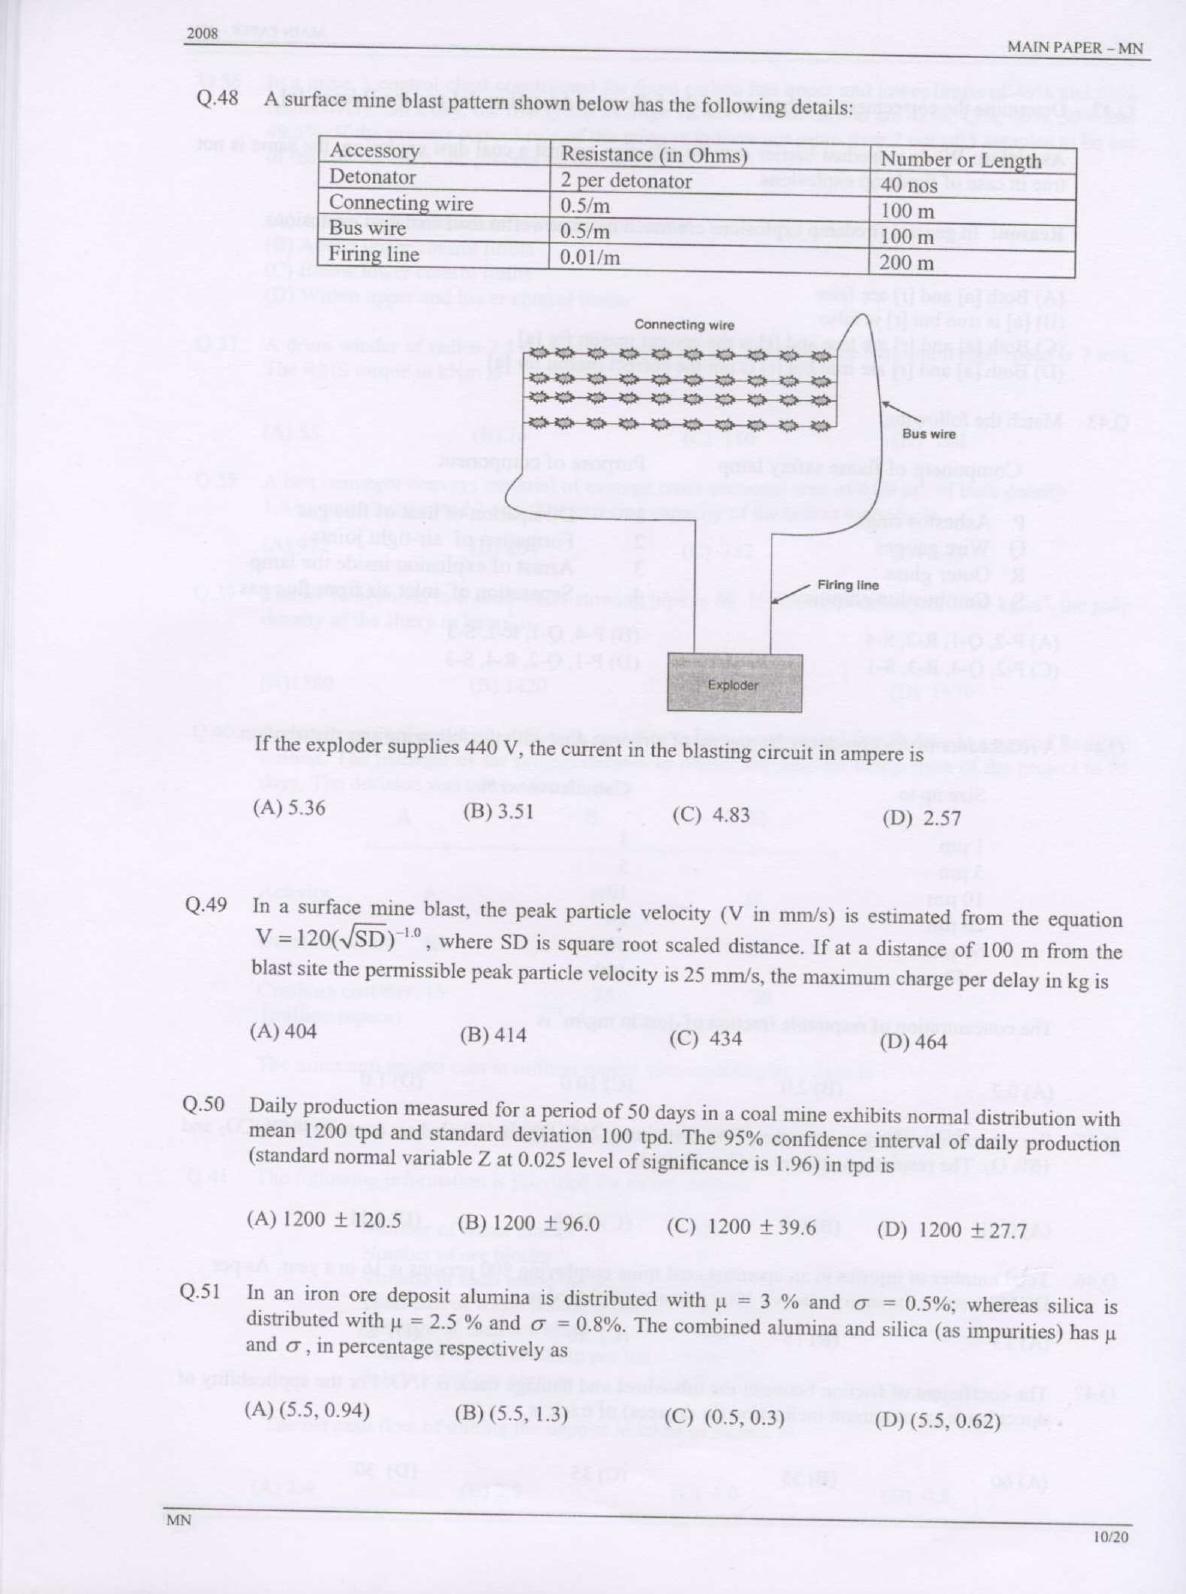 GATE 2008 Mining Engineering (MN) Question Paper with Answer Key - Page 10